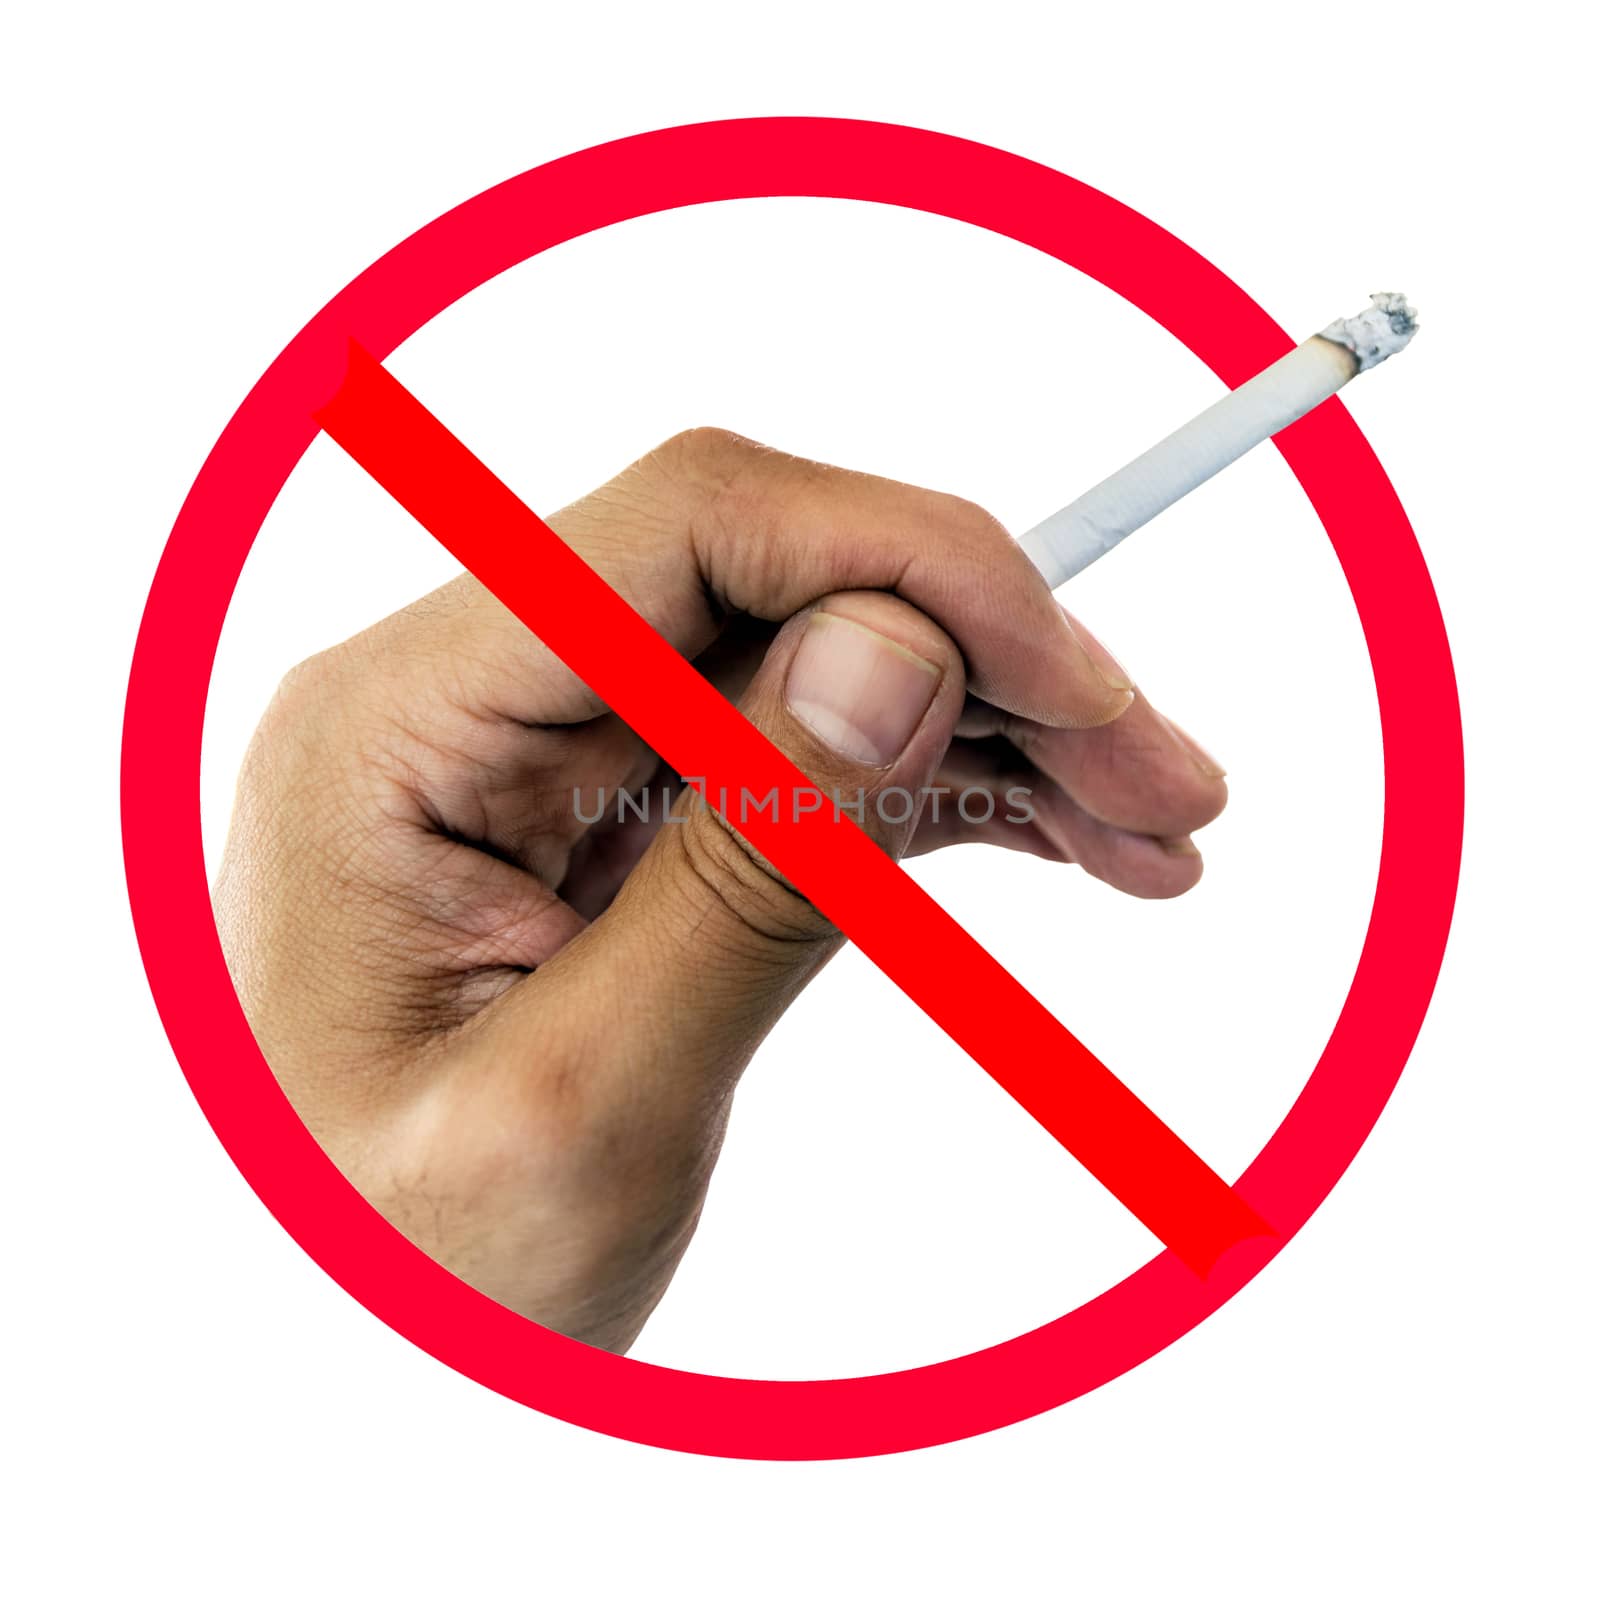 No smoking sign on cigarette in hand isolated on white background.